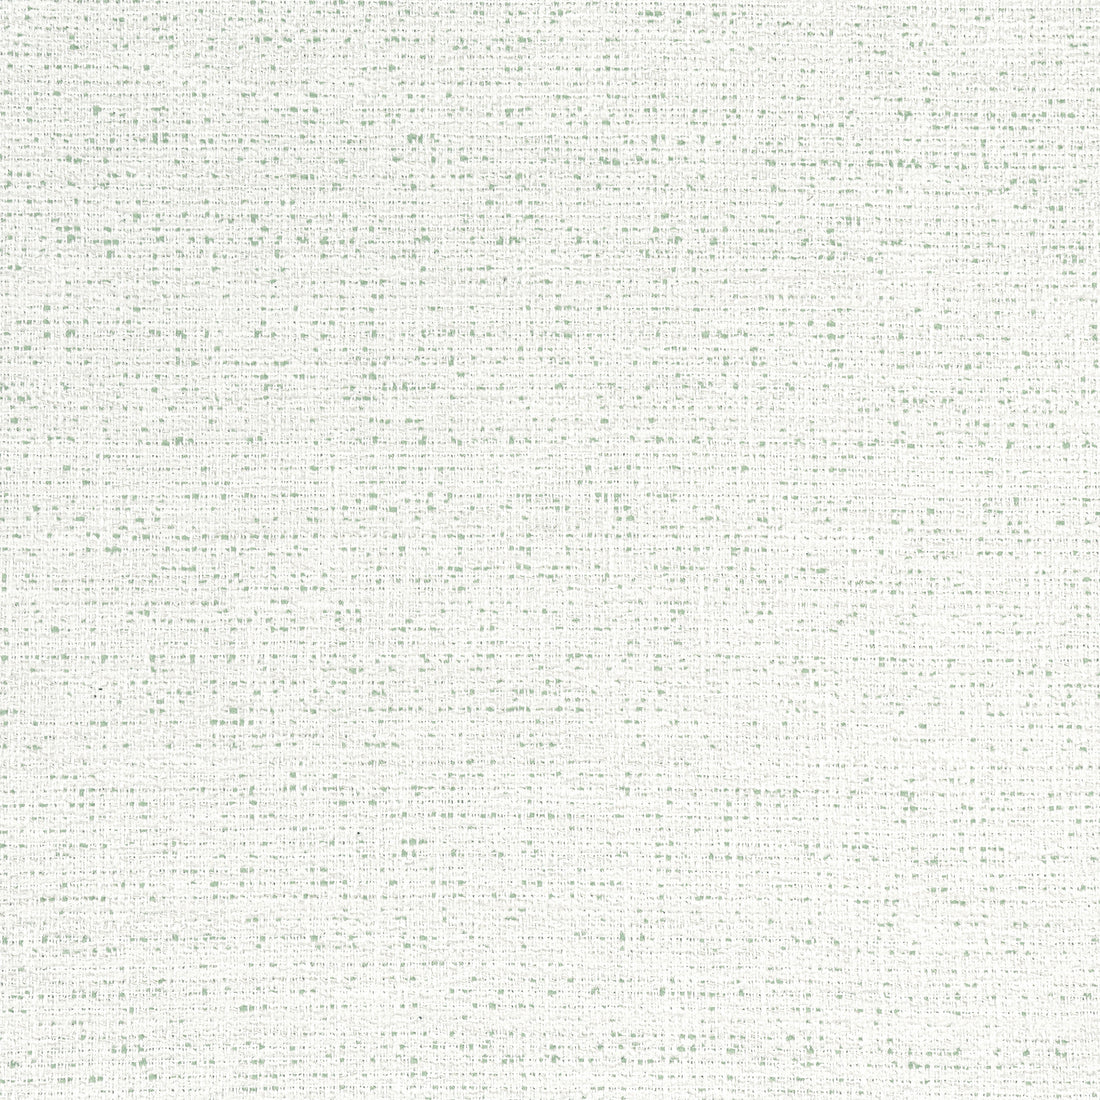 Adria fabric in seafoam color - pattern number W8794 - by Thibaut in the Haven Textures collection